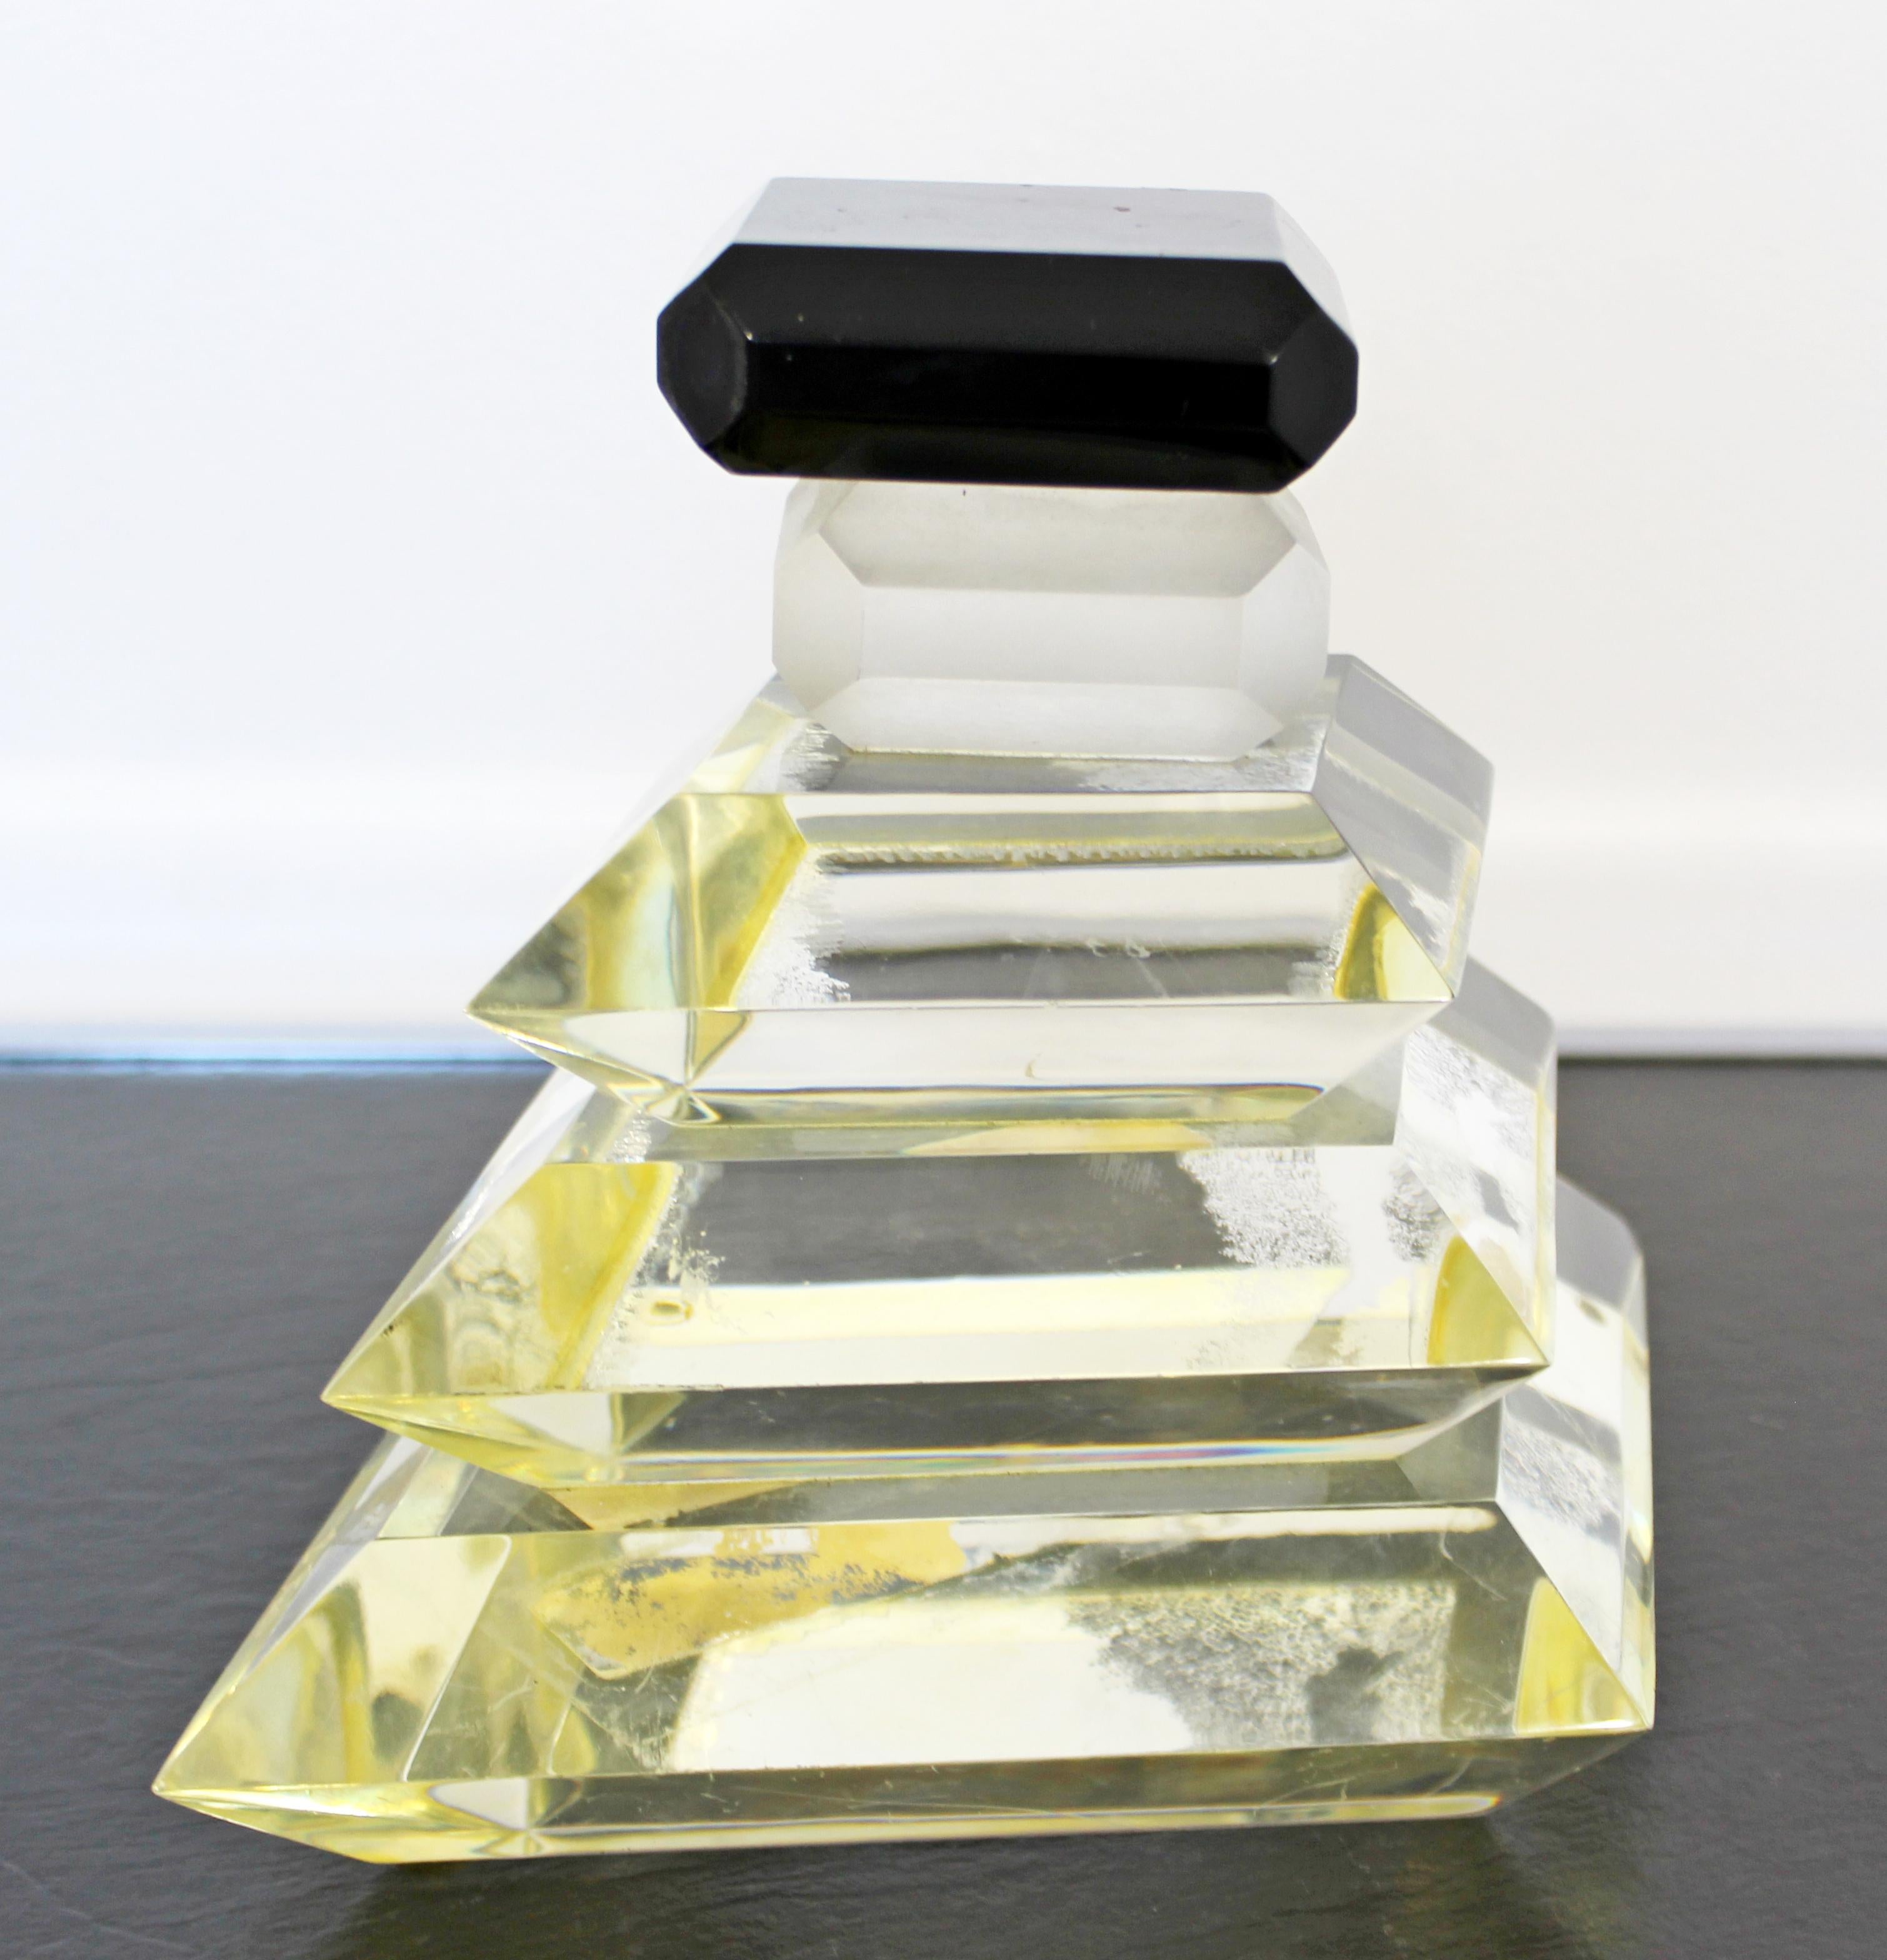 For your consideration is a simple and chic, perfume bottle table sculpture, made of thick Lucite, signed B. Rich, circa 1980s. In very good condition. The dimensions are 9